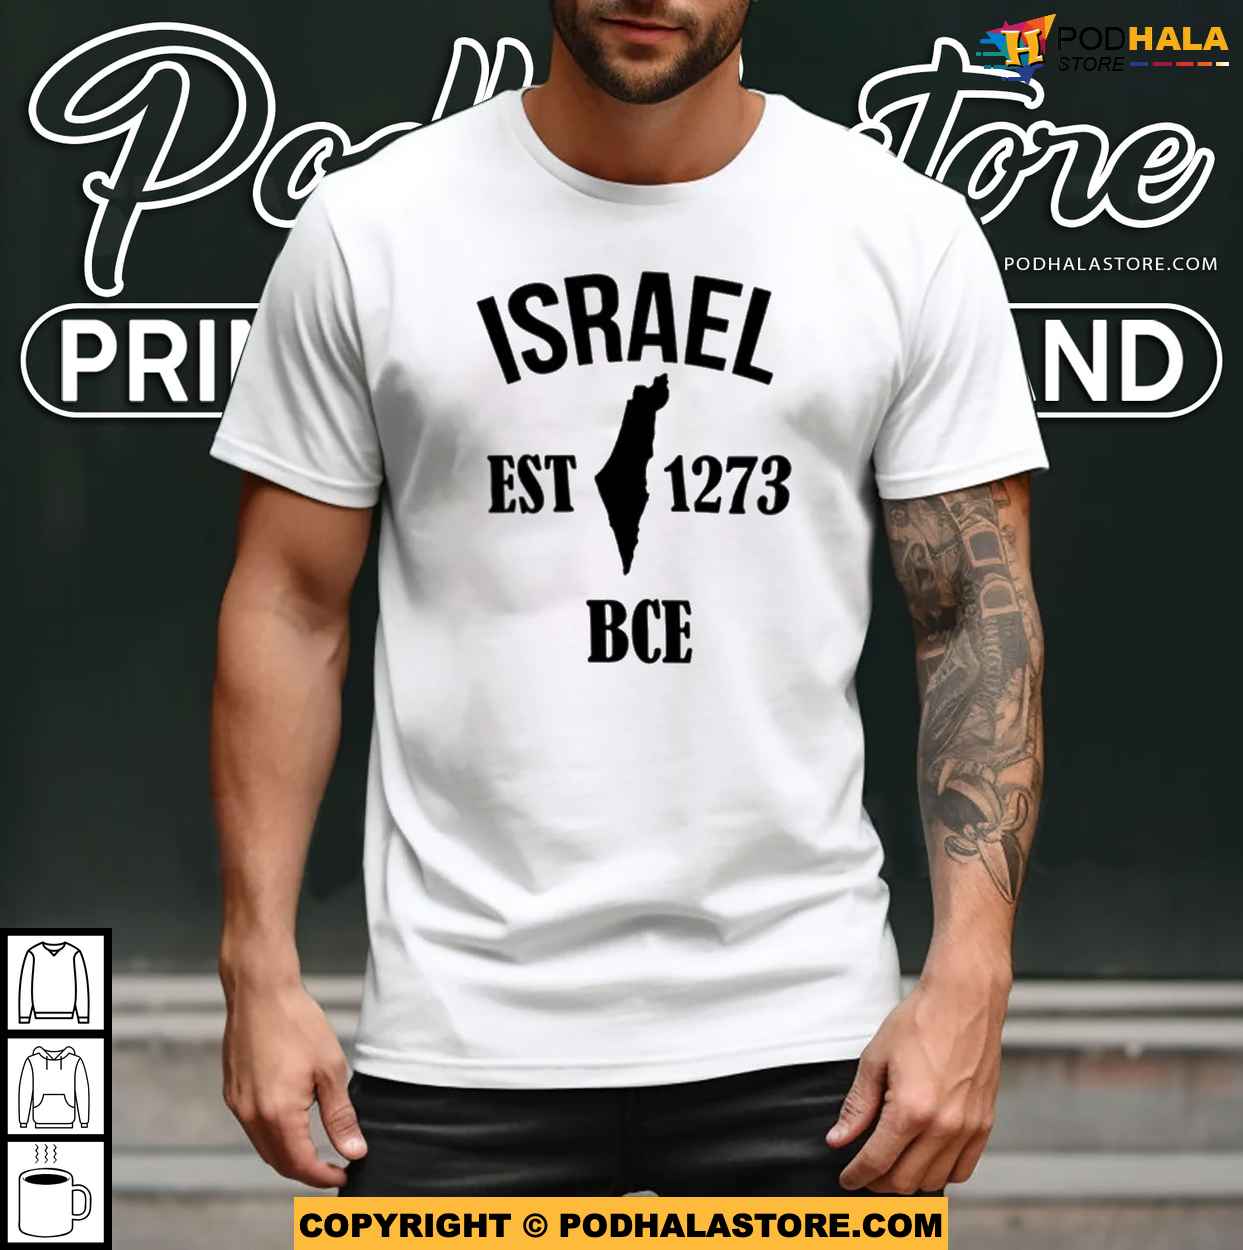 Proudly Israel Est 1273 BCE Shirt, Show Your Heritage